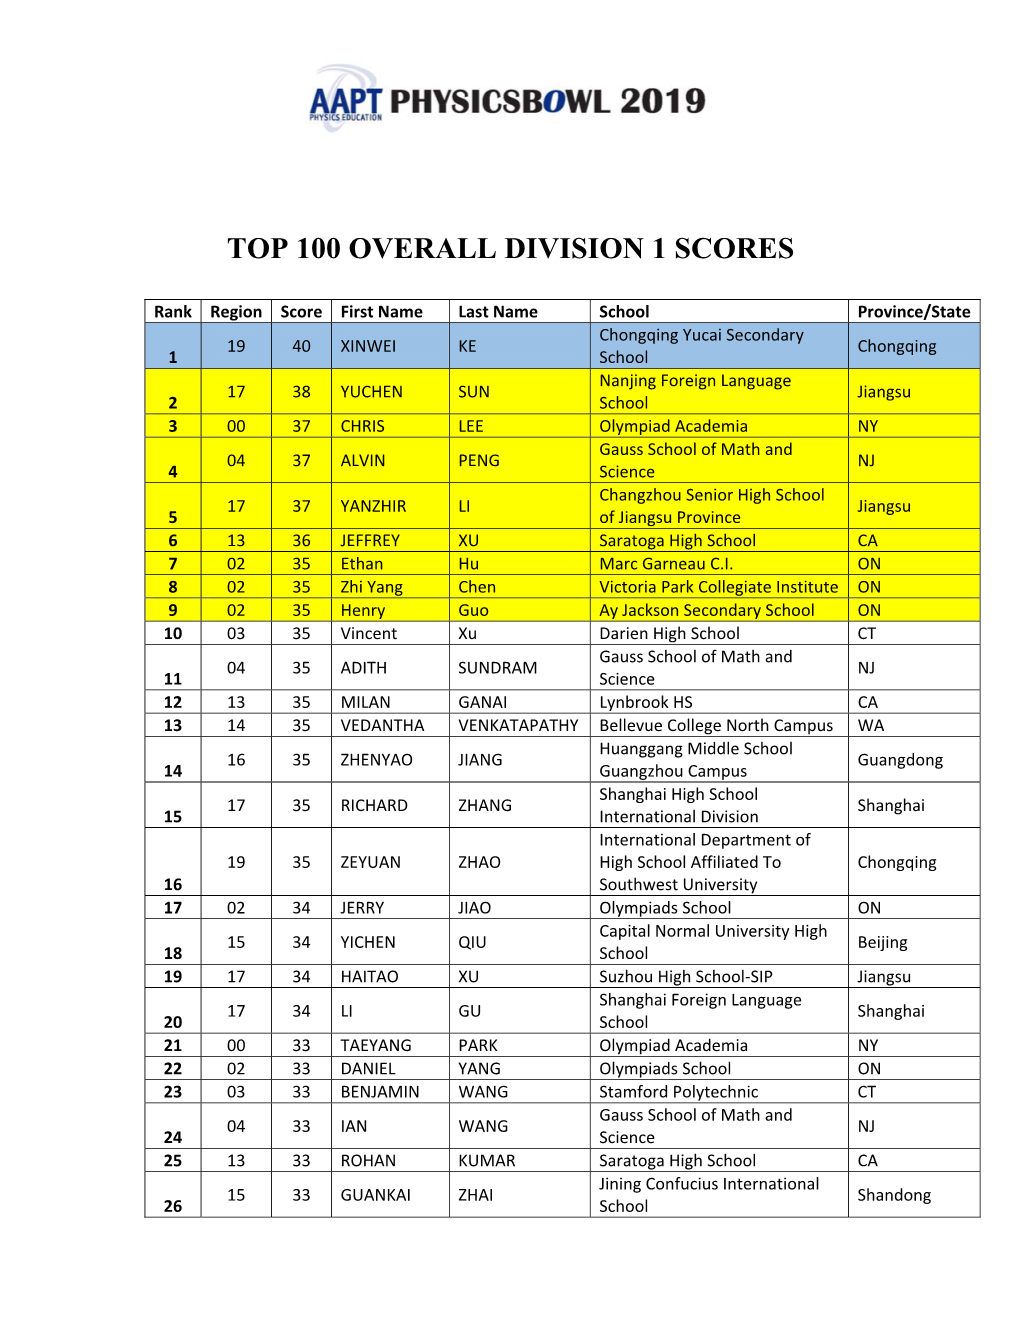 Top 100 Overall Division 1 Scores